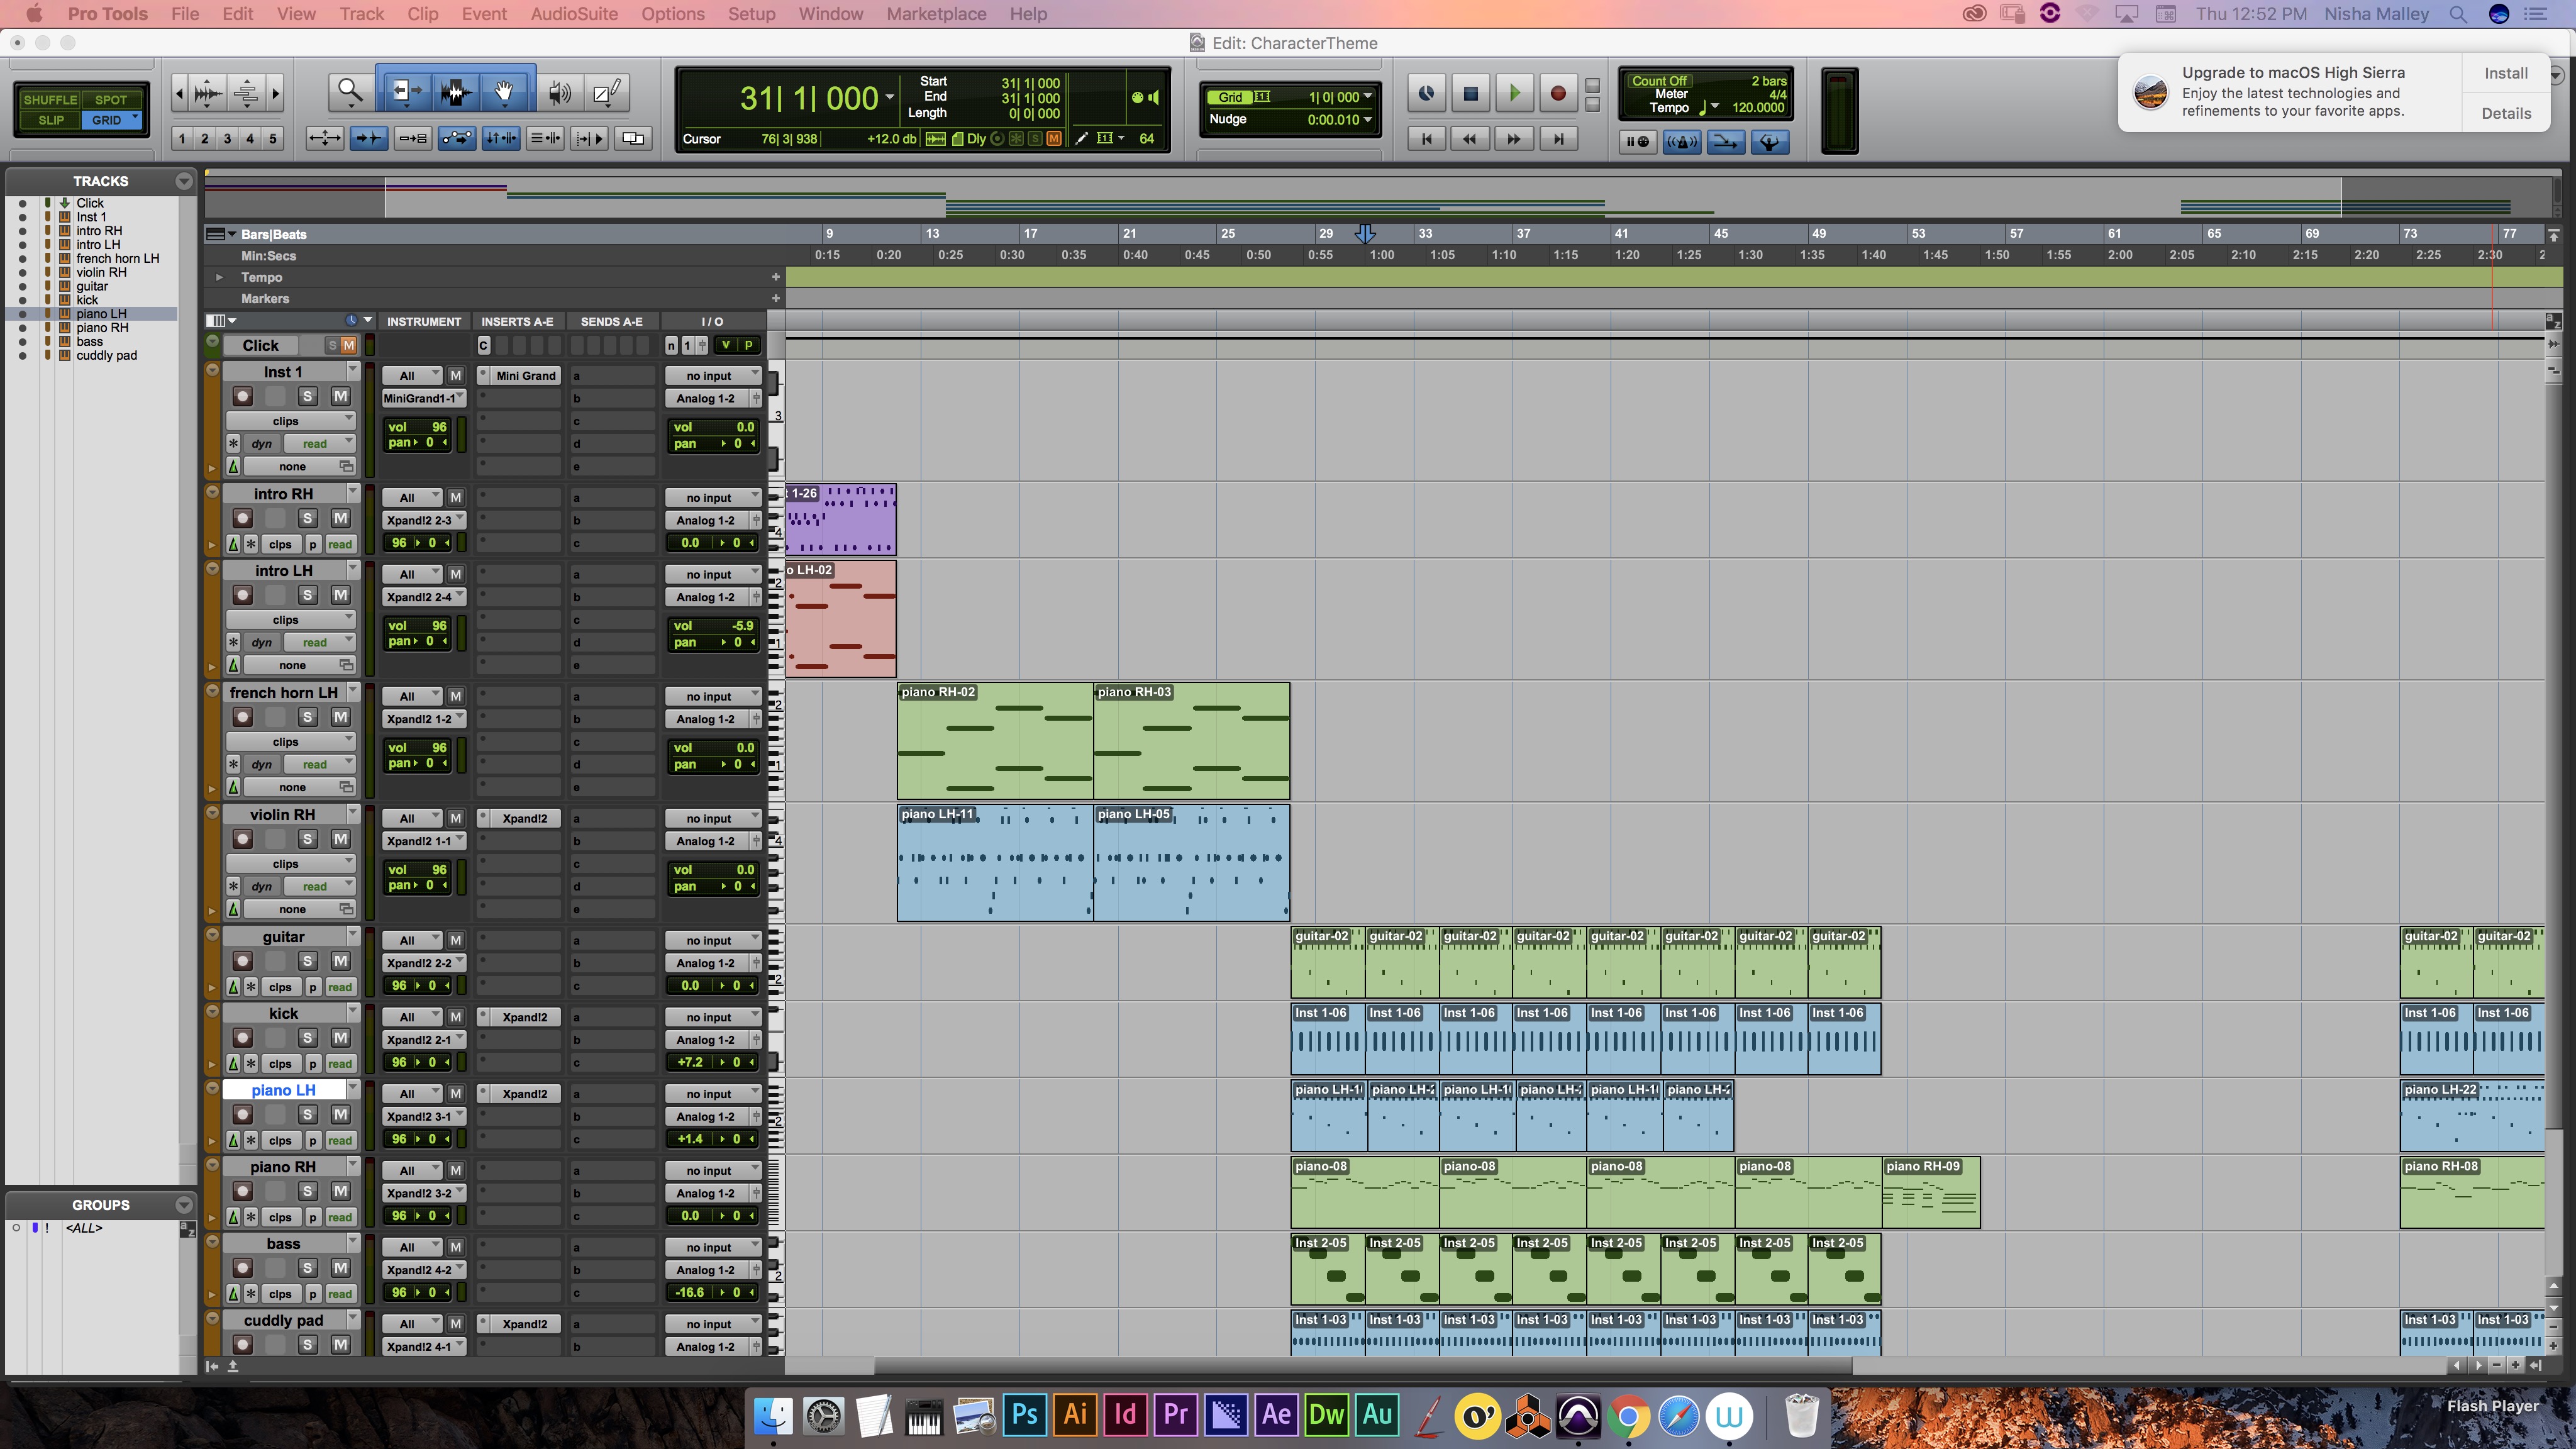 This is a screenshot of my Pro Tools session for the story theme.